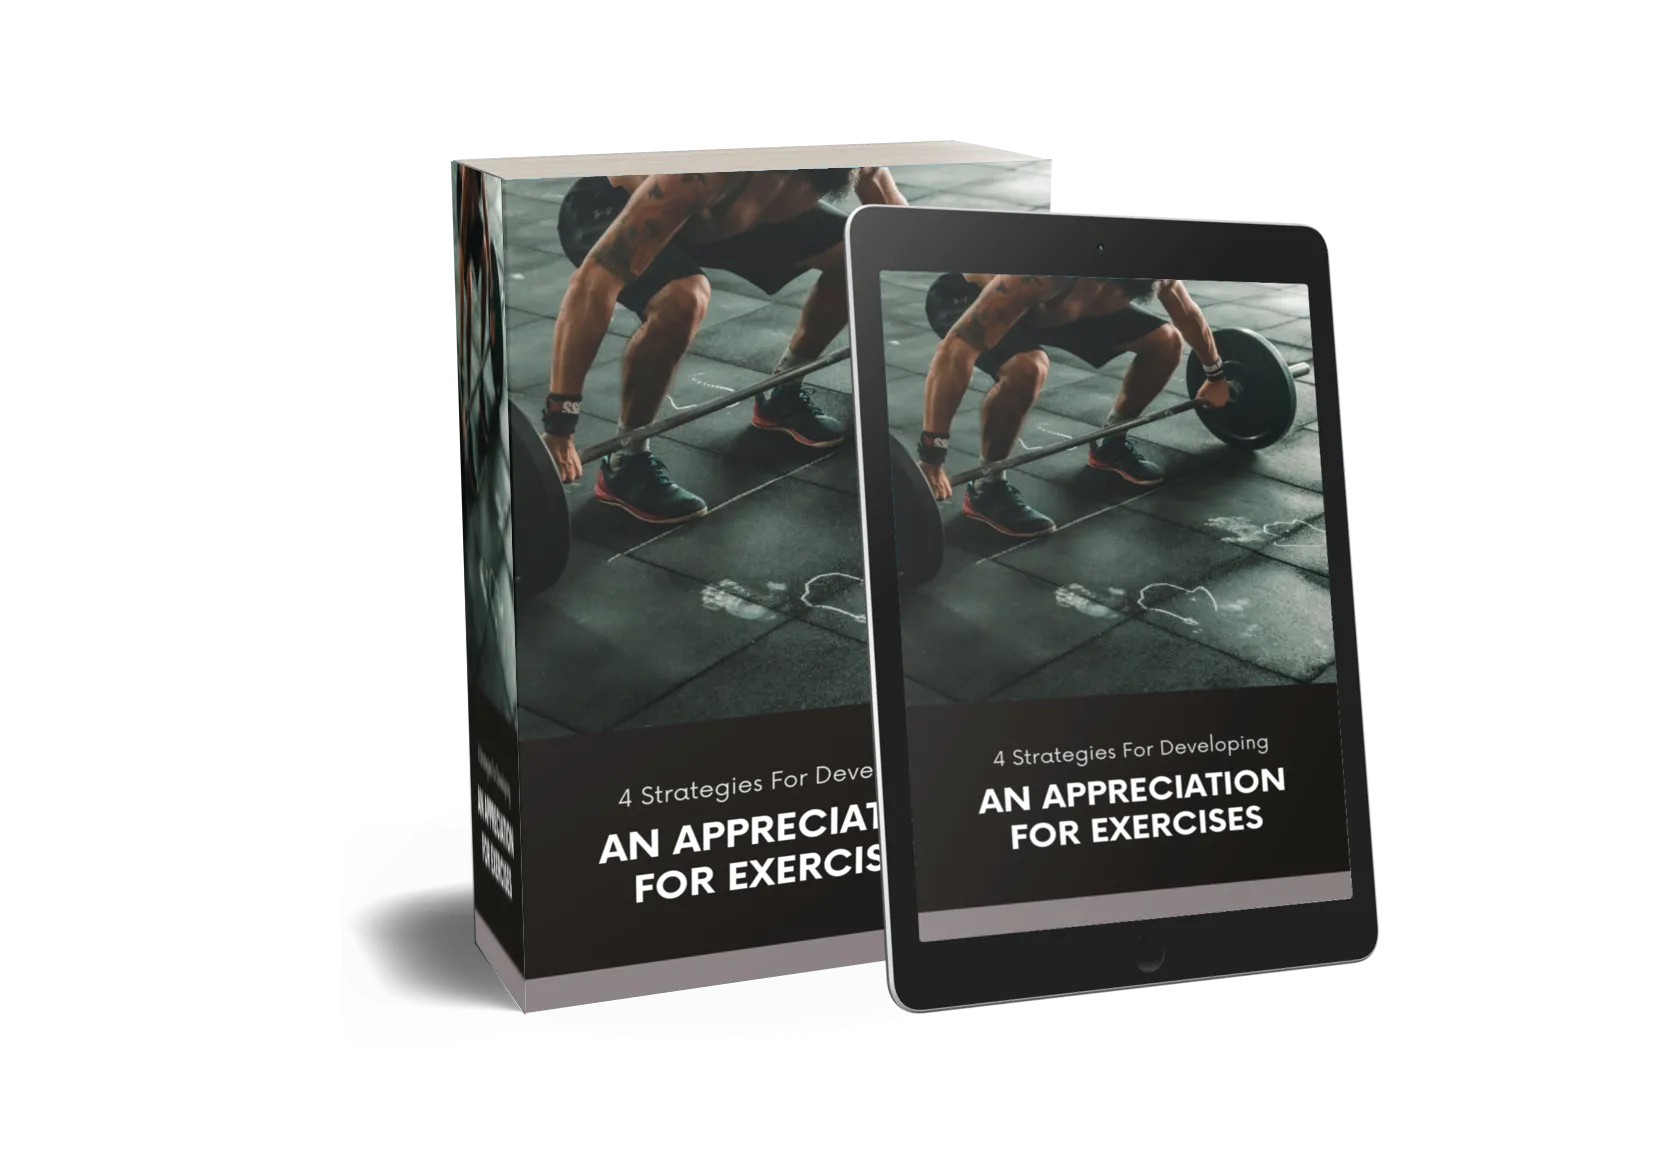 4 Strategies For Developing An Appreciation For Exercises